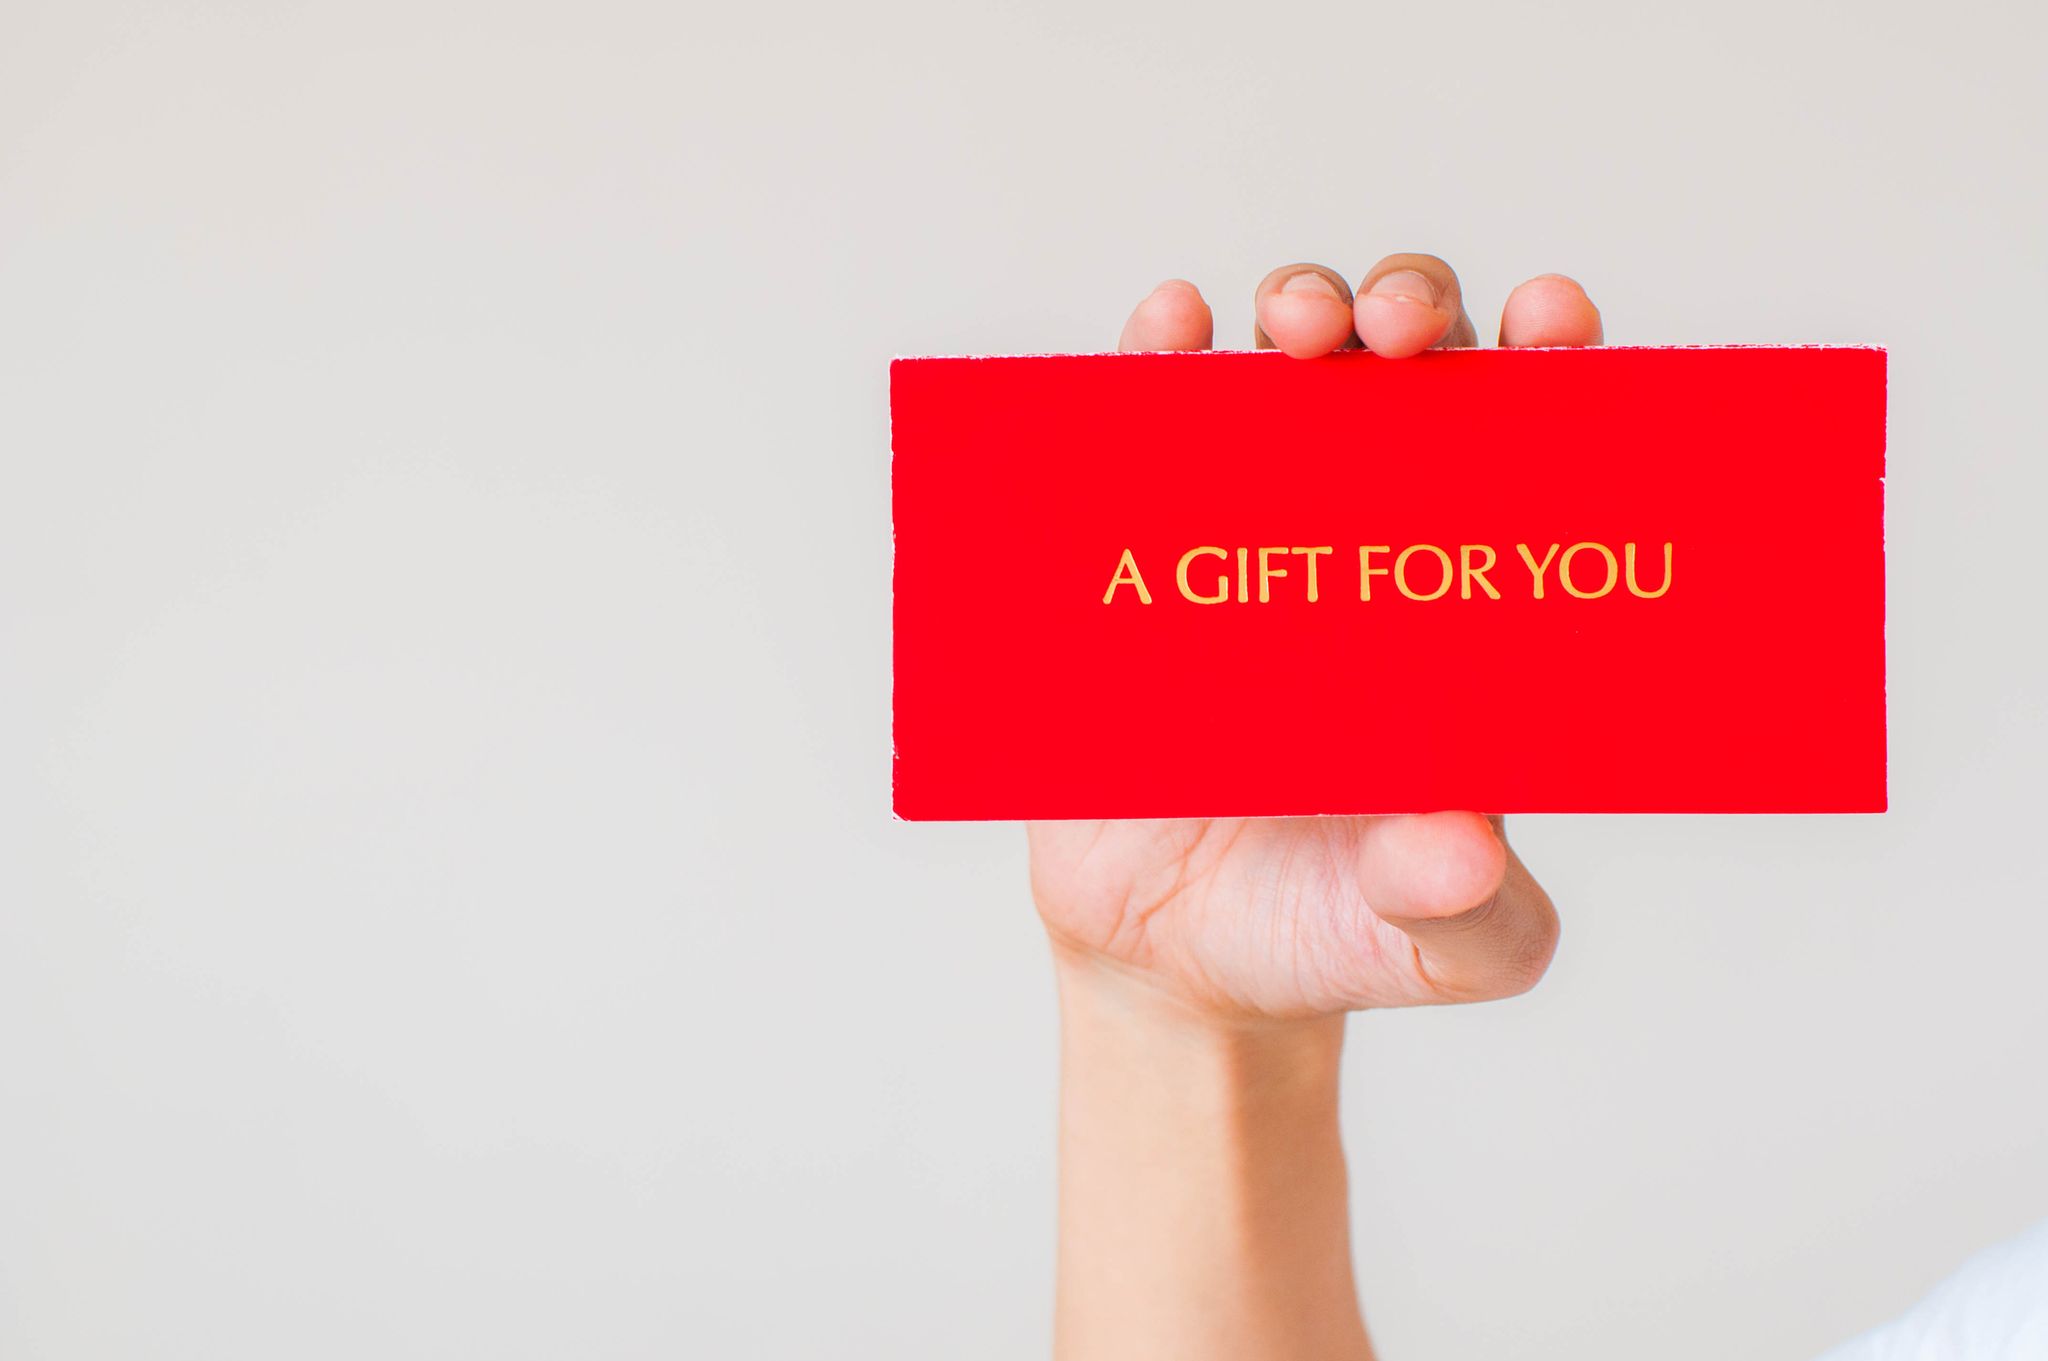 One4all Multi-Store Gift Cards – Thousands of choices with one gift card